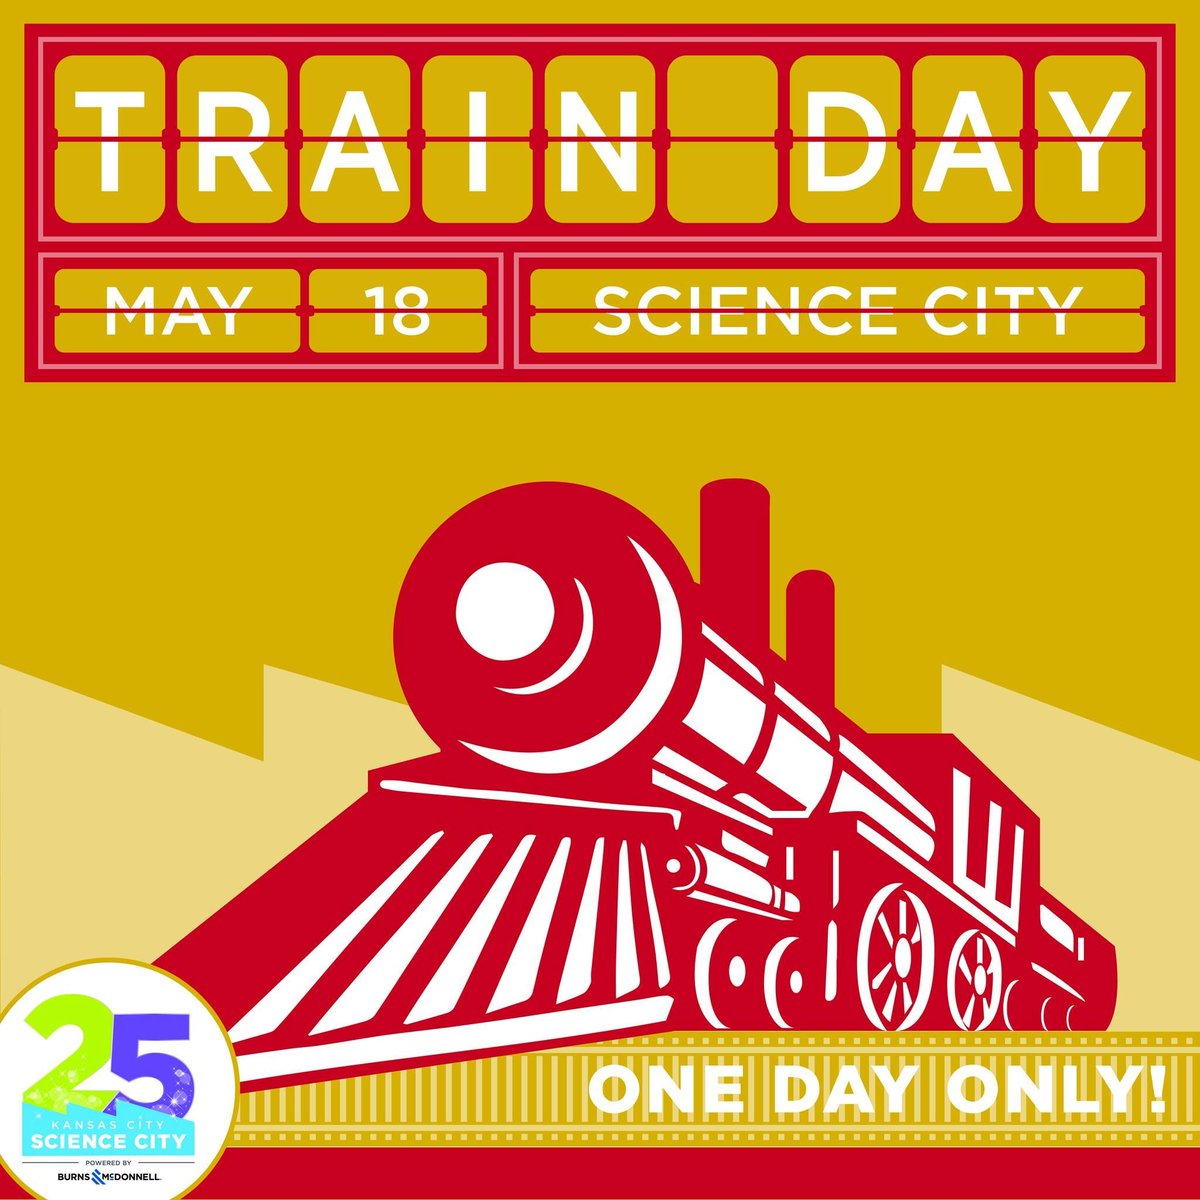 THIS SATURDAY! CPKC's 'Empress' 2816 steam locomotive is making a historic visit to Union Station. And at Science City, we're celebrating with a special day of train-themed FAMILY FUN! Join us for Train Day at Science City! buff.ly/3UVQjFn